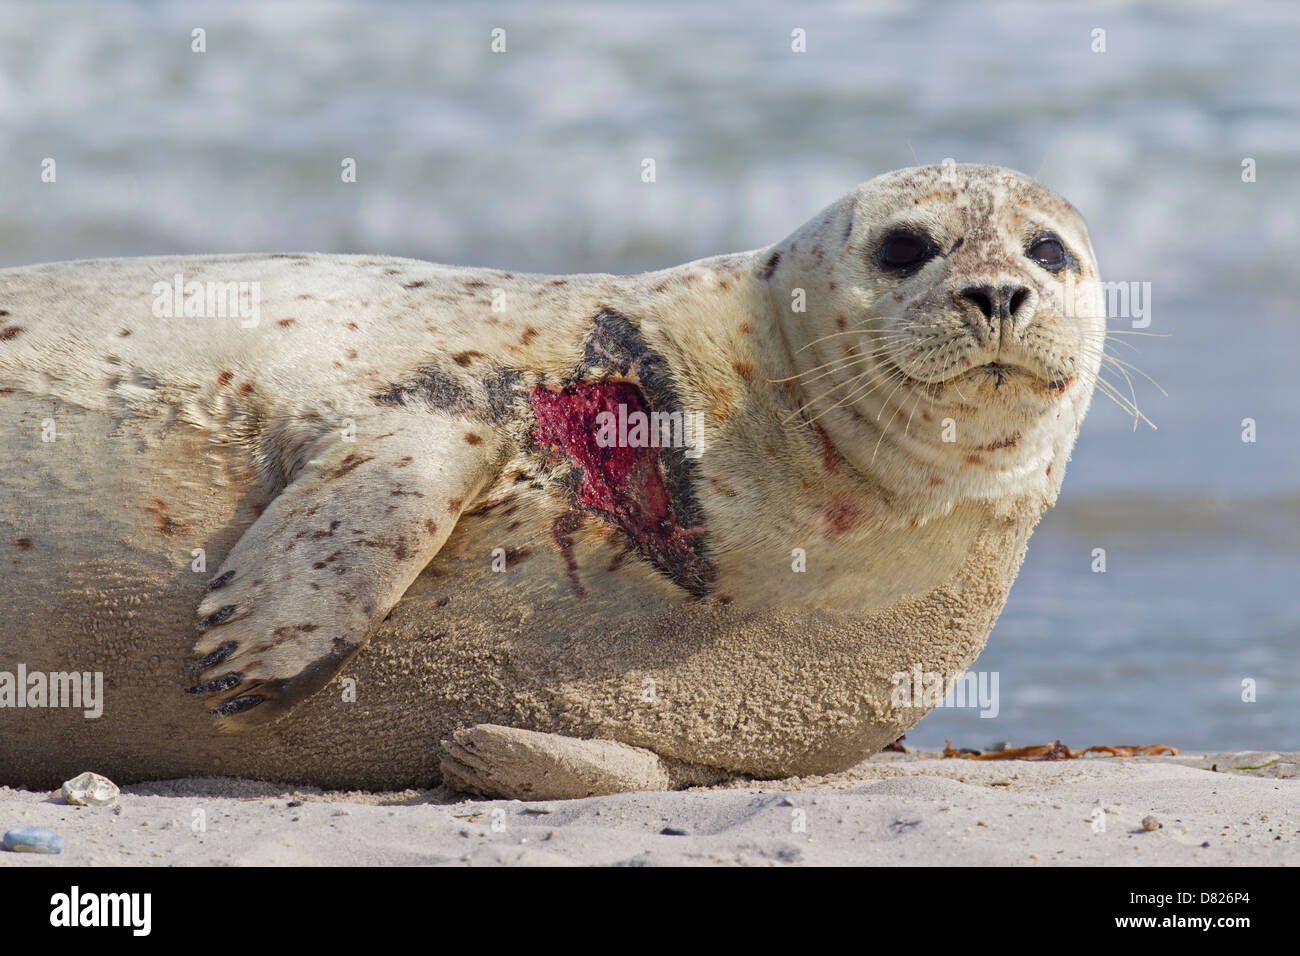 Injured Common seal / Harbour seal (Phoca vitulina) with flesh wound resting on beach Stock Photo